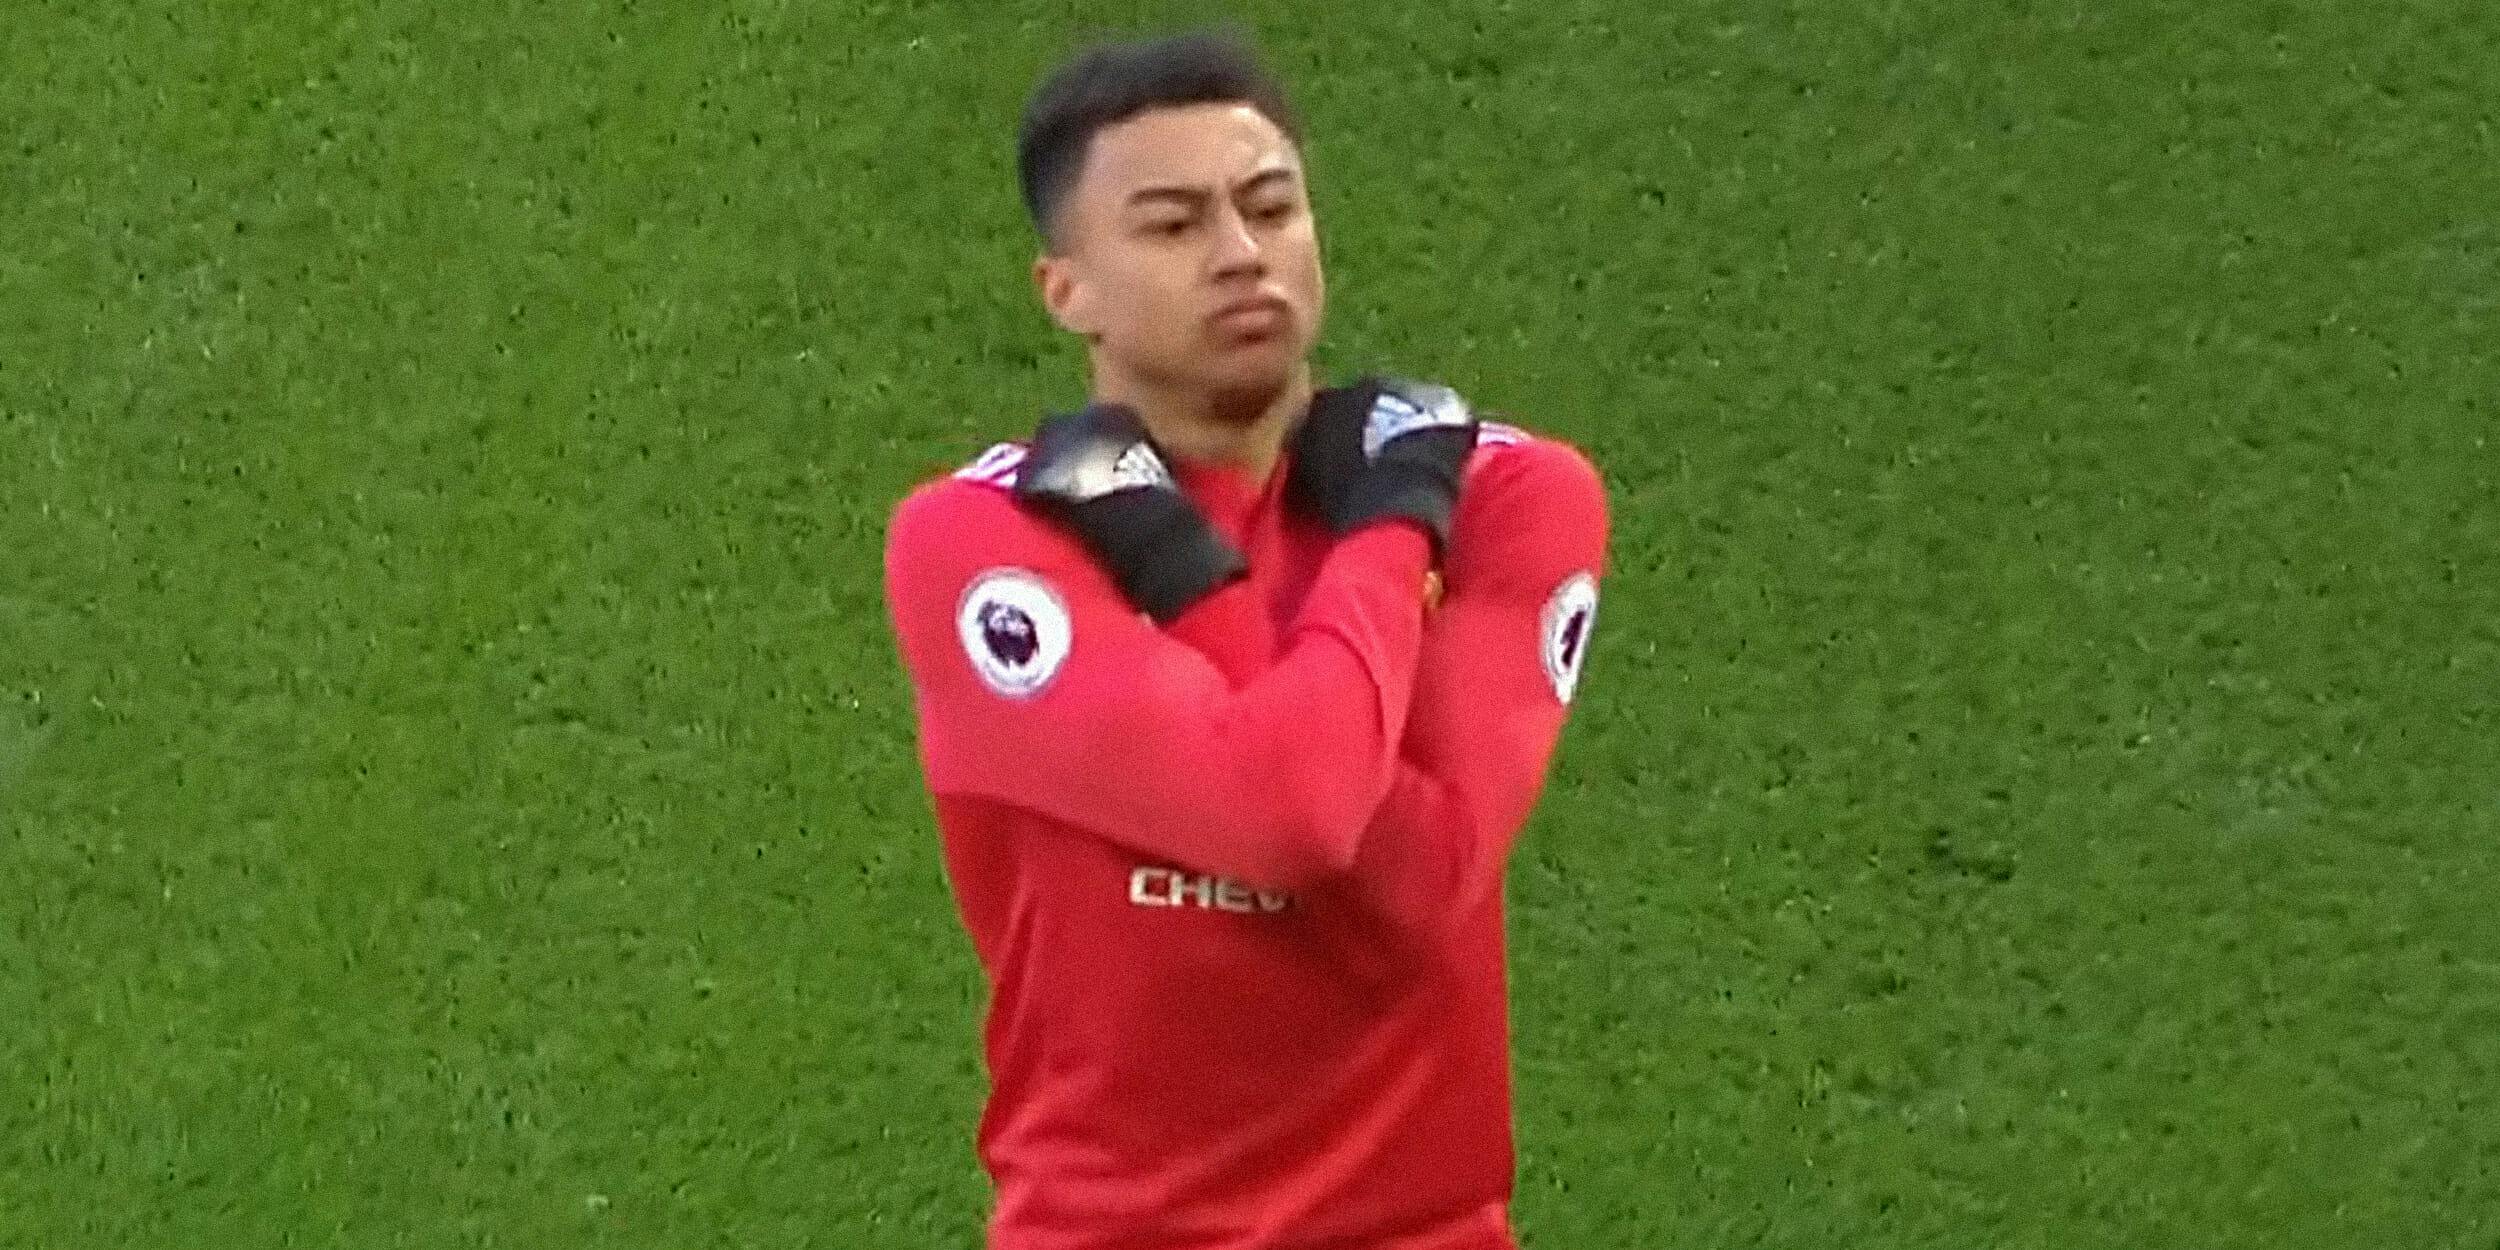 Manchester United Players Celebrate Goal With 'Black Panther' Salute